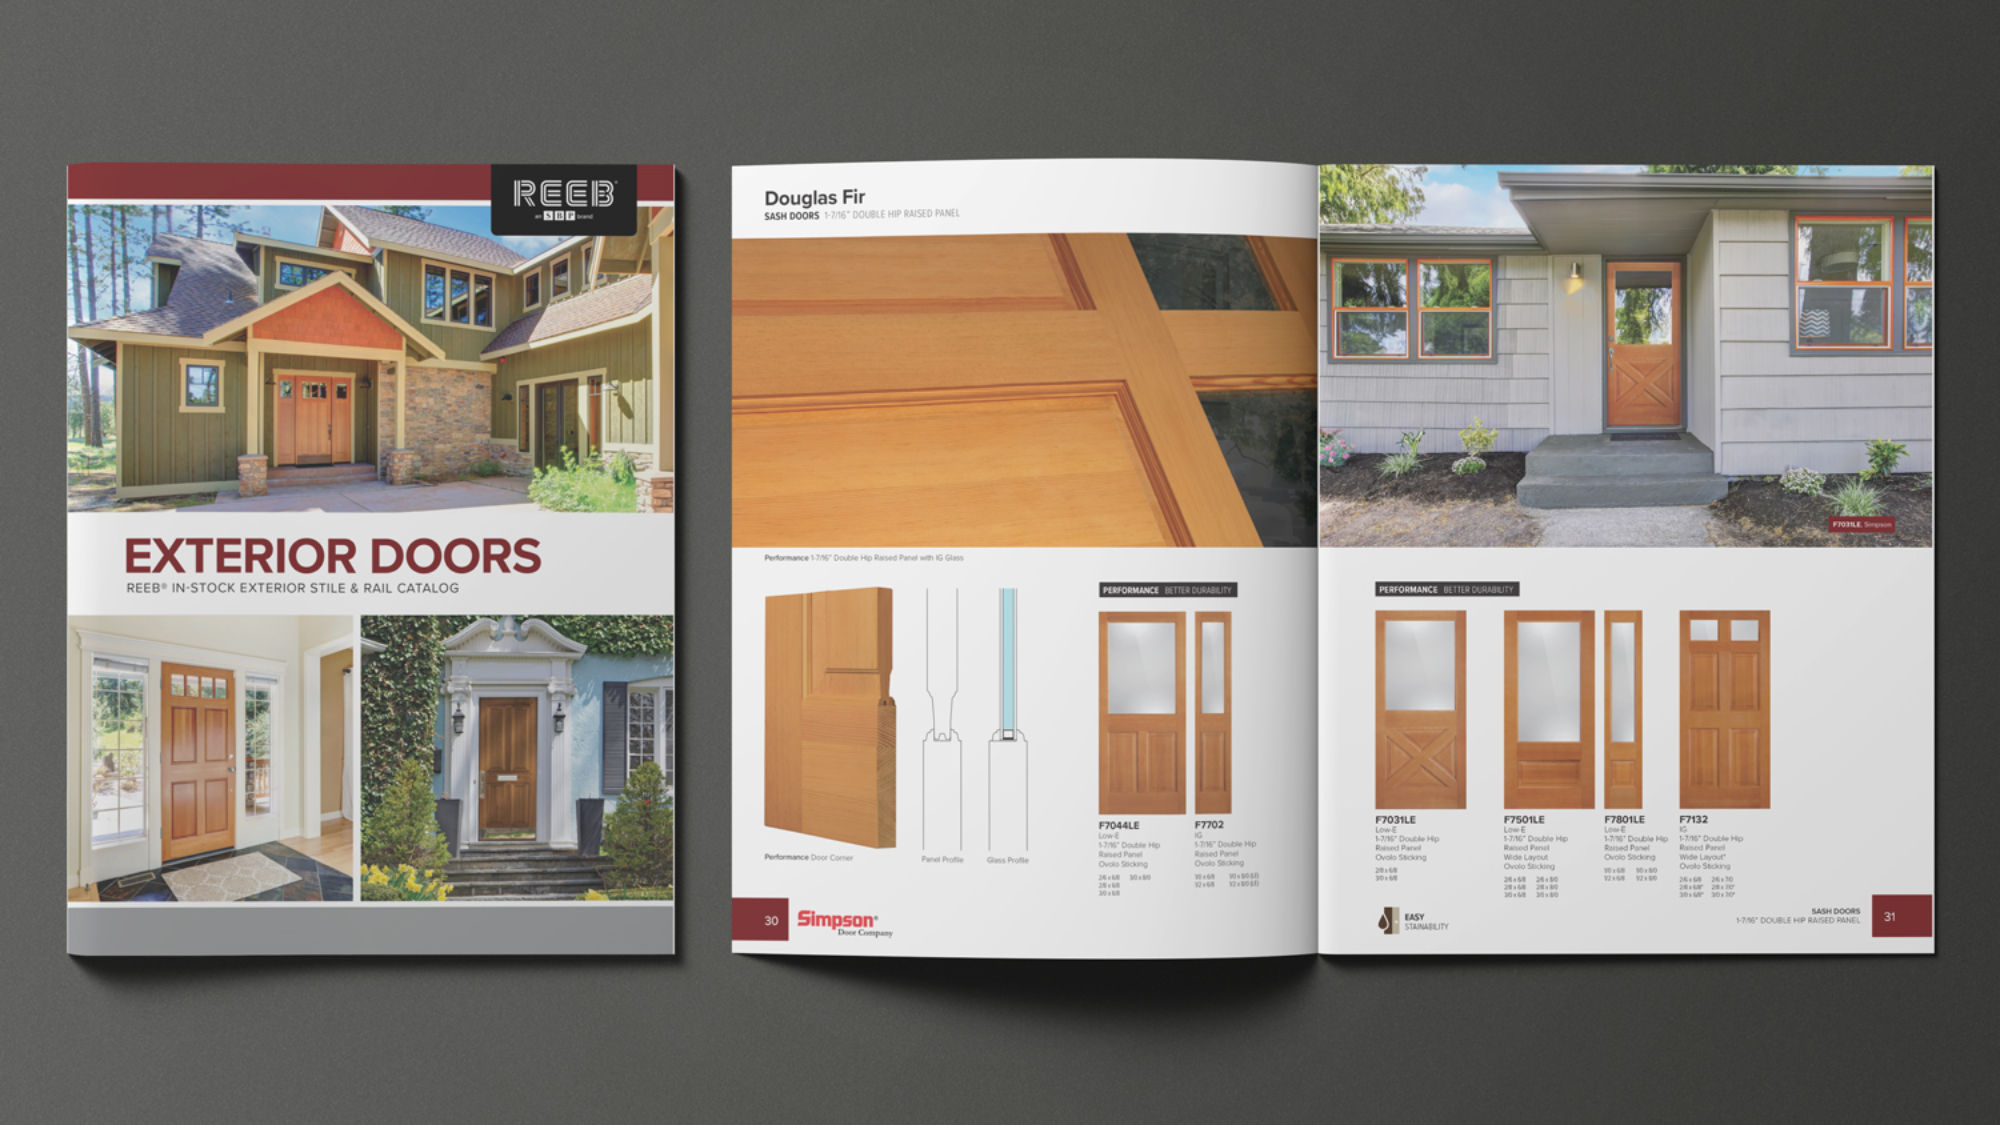 Discover the extraordinary range of high-quality and versatile doors in the Reeb Door catalog. From elegant entry doors to functional interior doors, Reeb offers exceptional craftsmanship and design options. Dive into the Reeb Door catalog today and find the perfect door to enhance your home's aesthetics, functionality, and security.